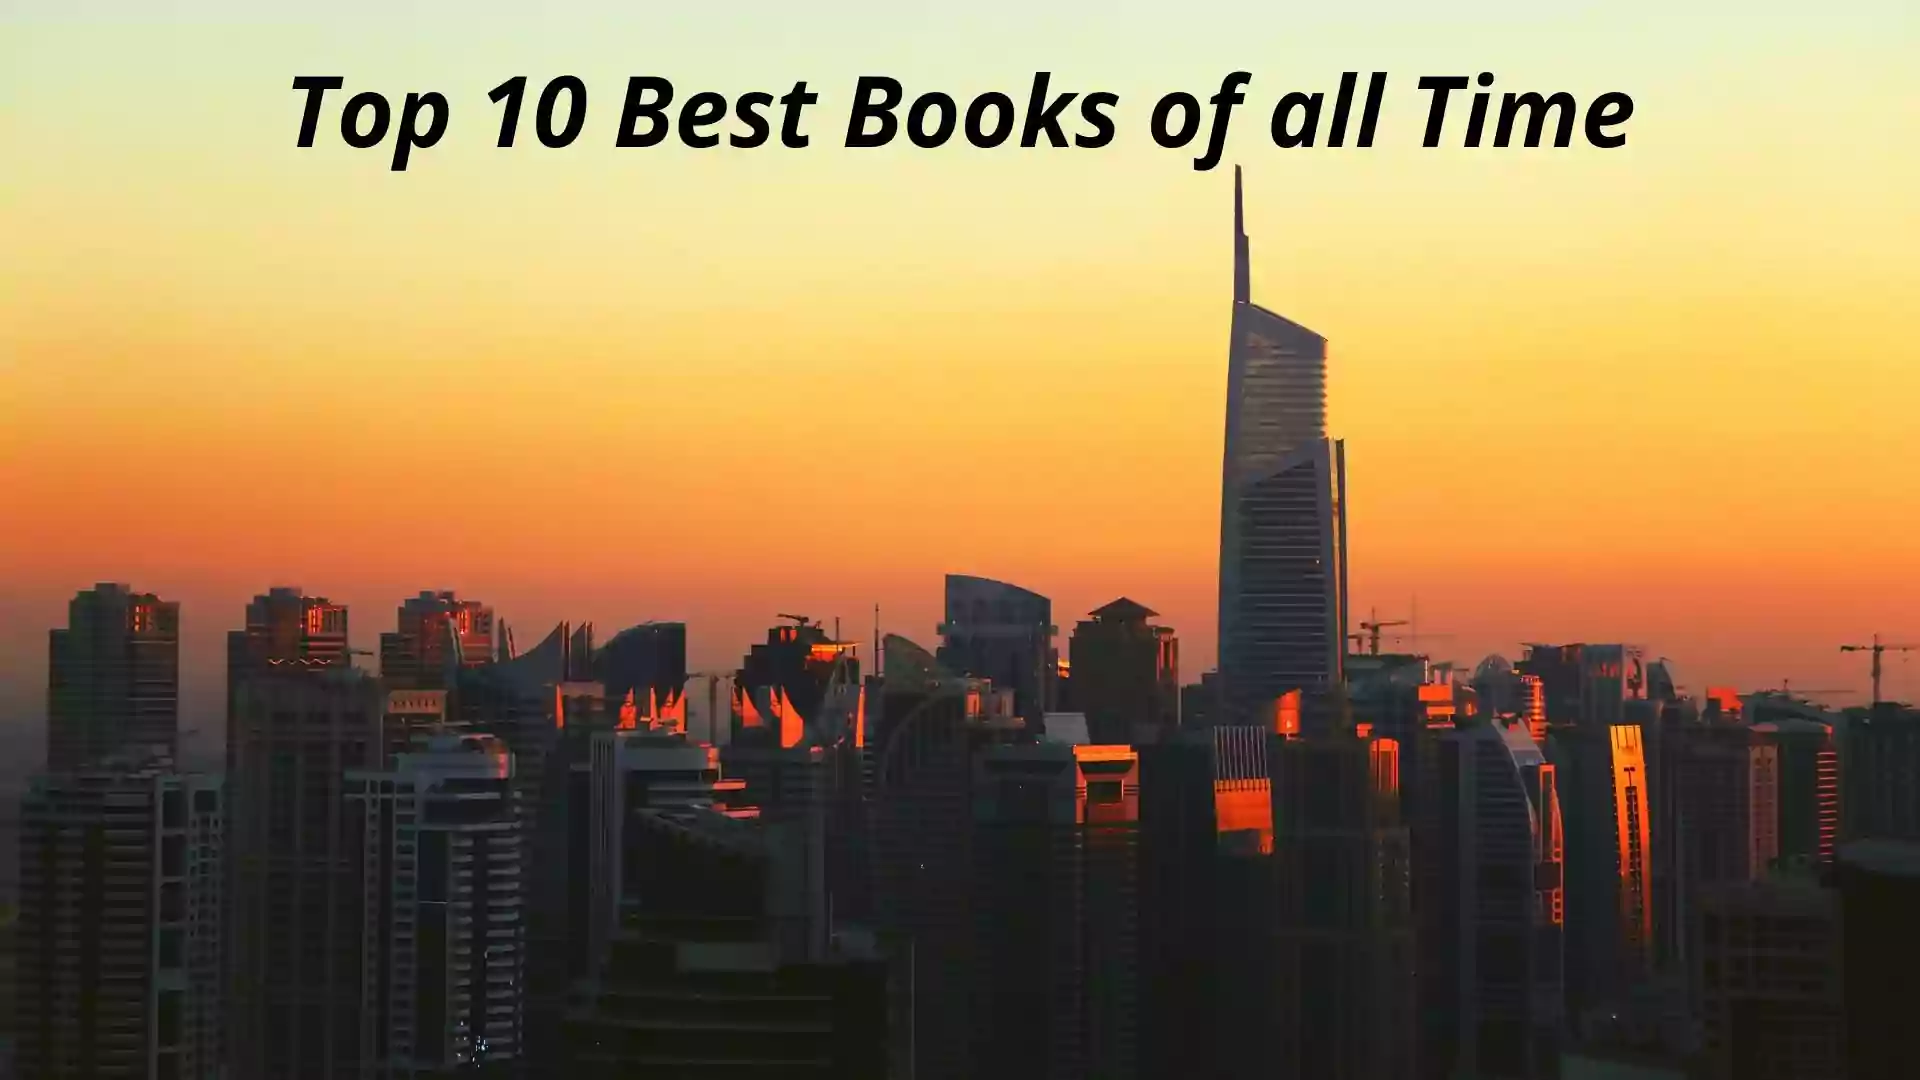 Top 10 Best Books of all Time 